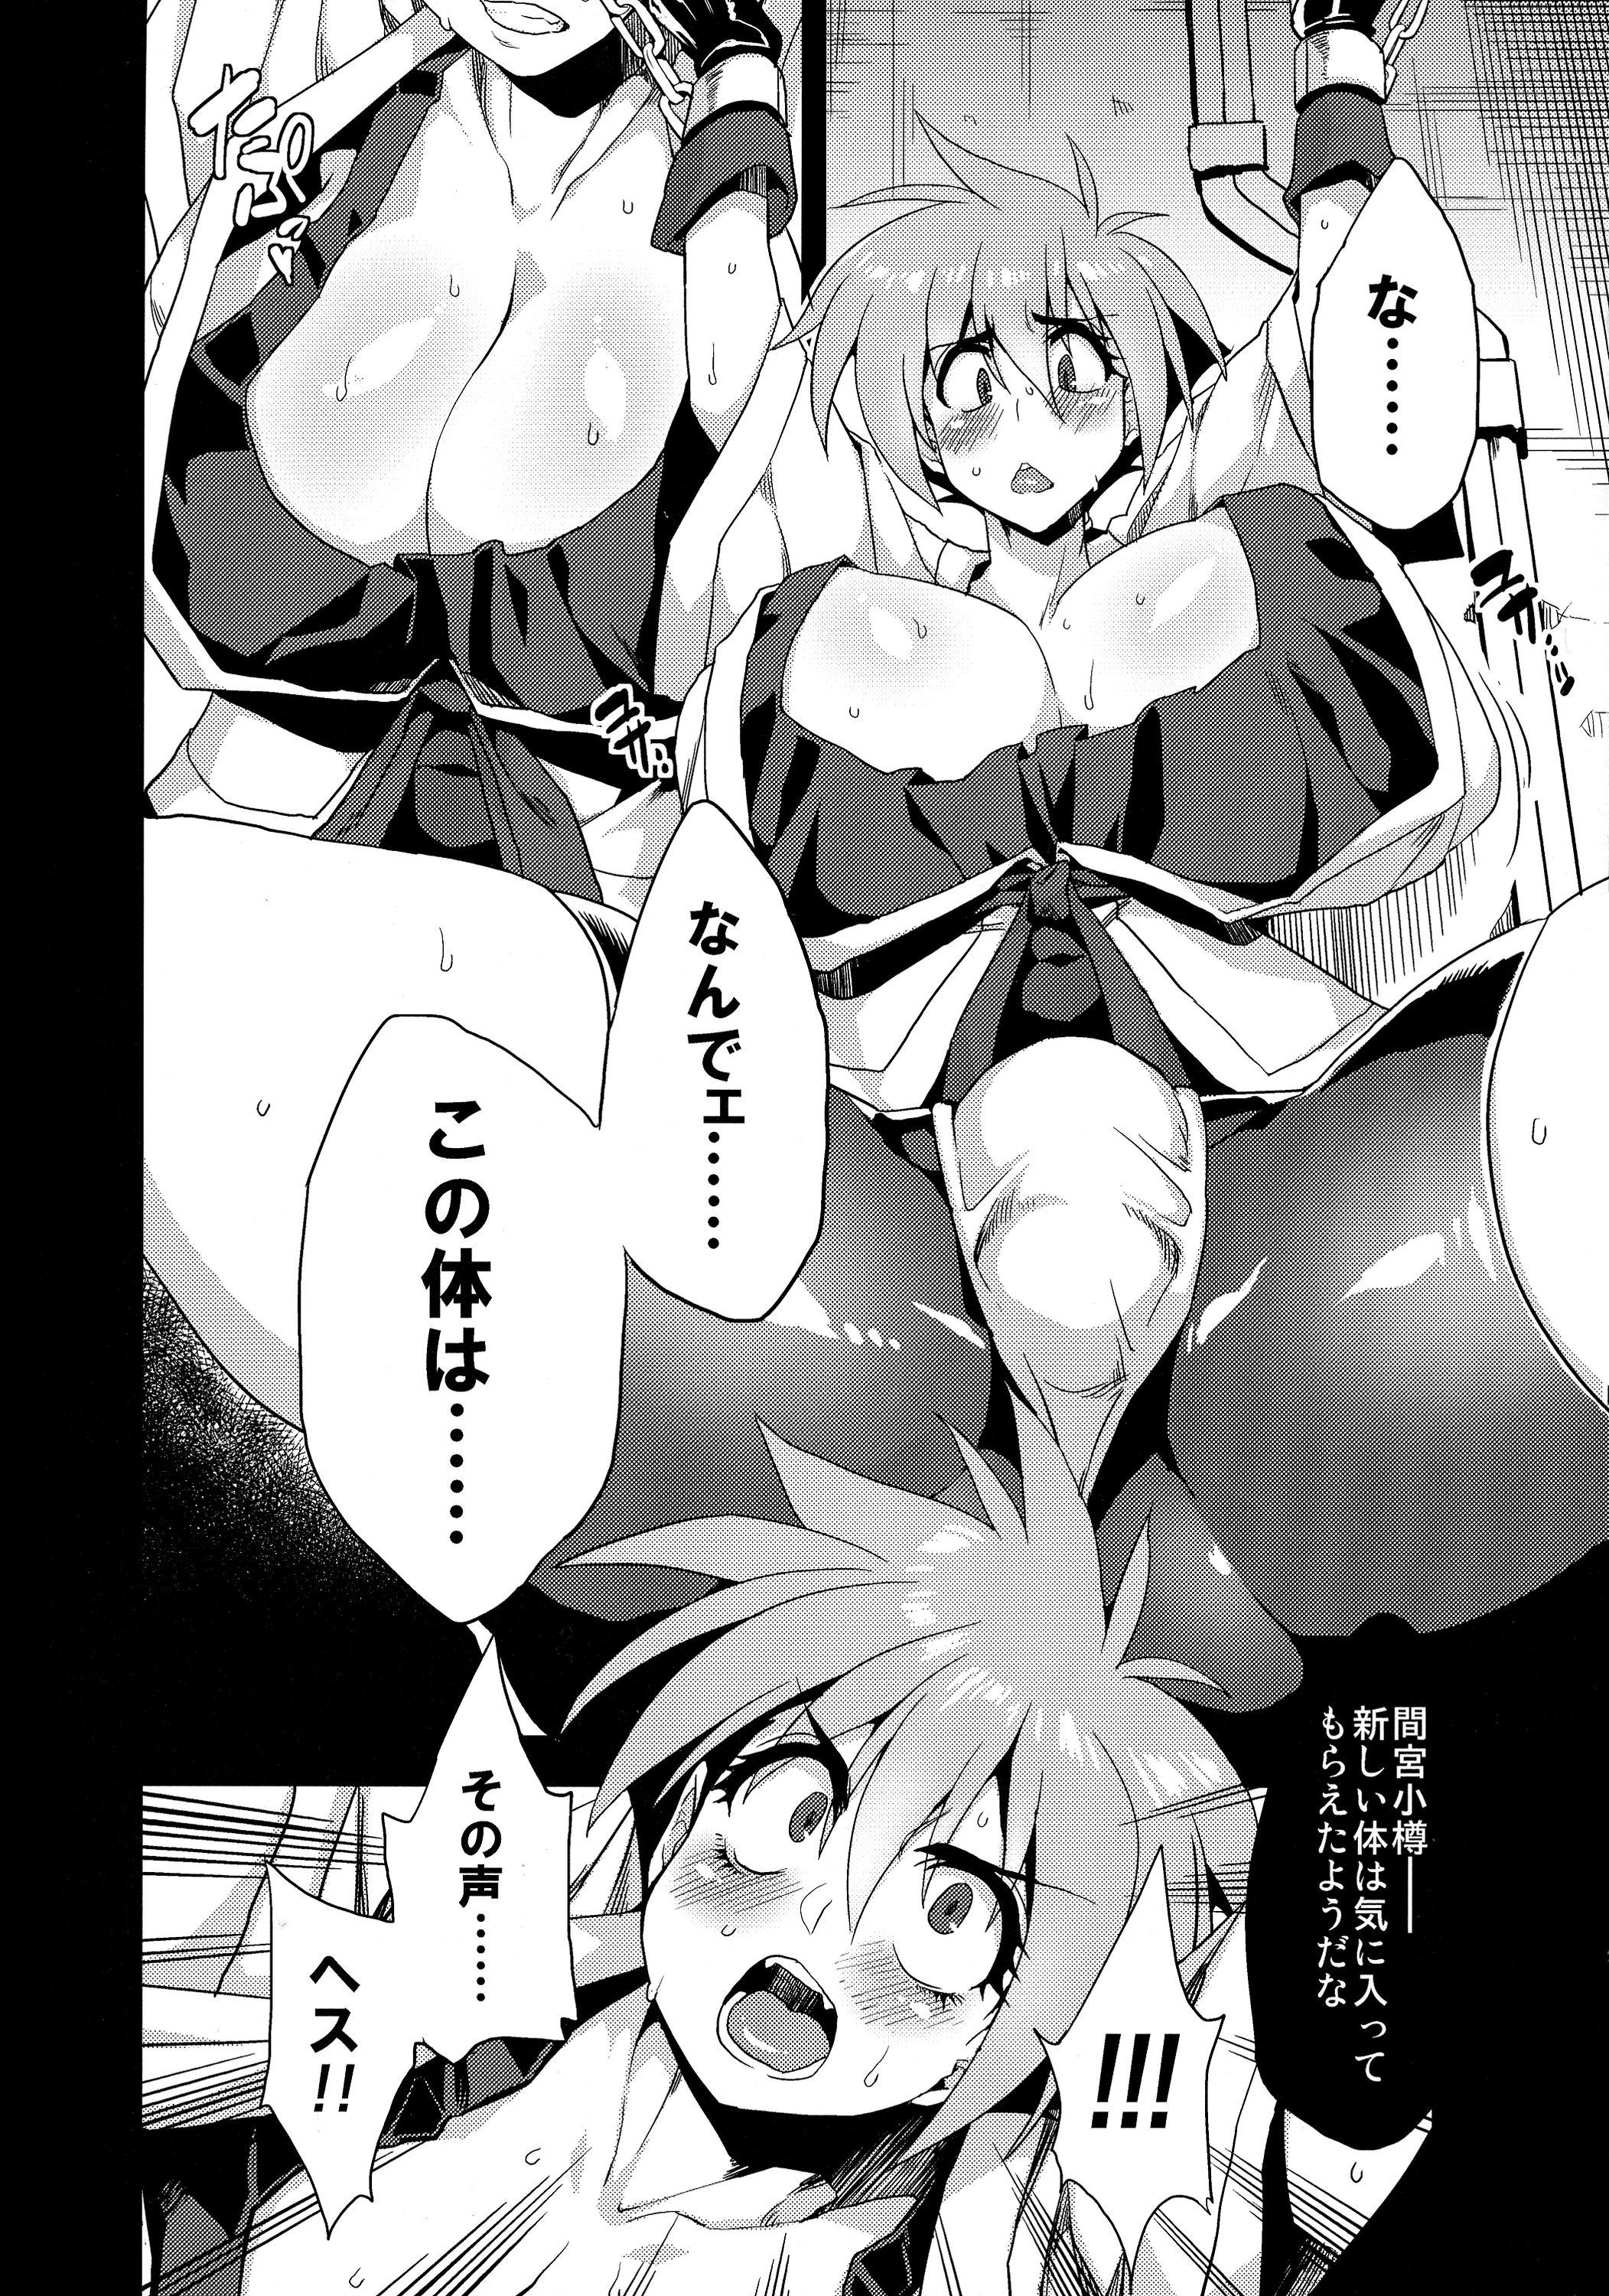 Glamour Hentai Marionette 3 - Saber marionette Bald Pussy - Page 4